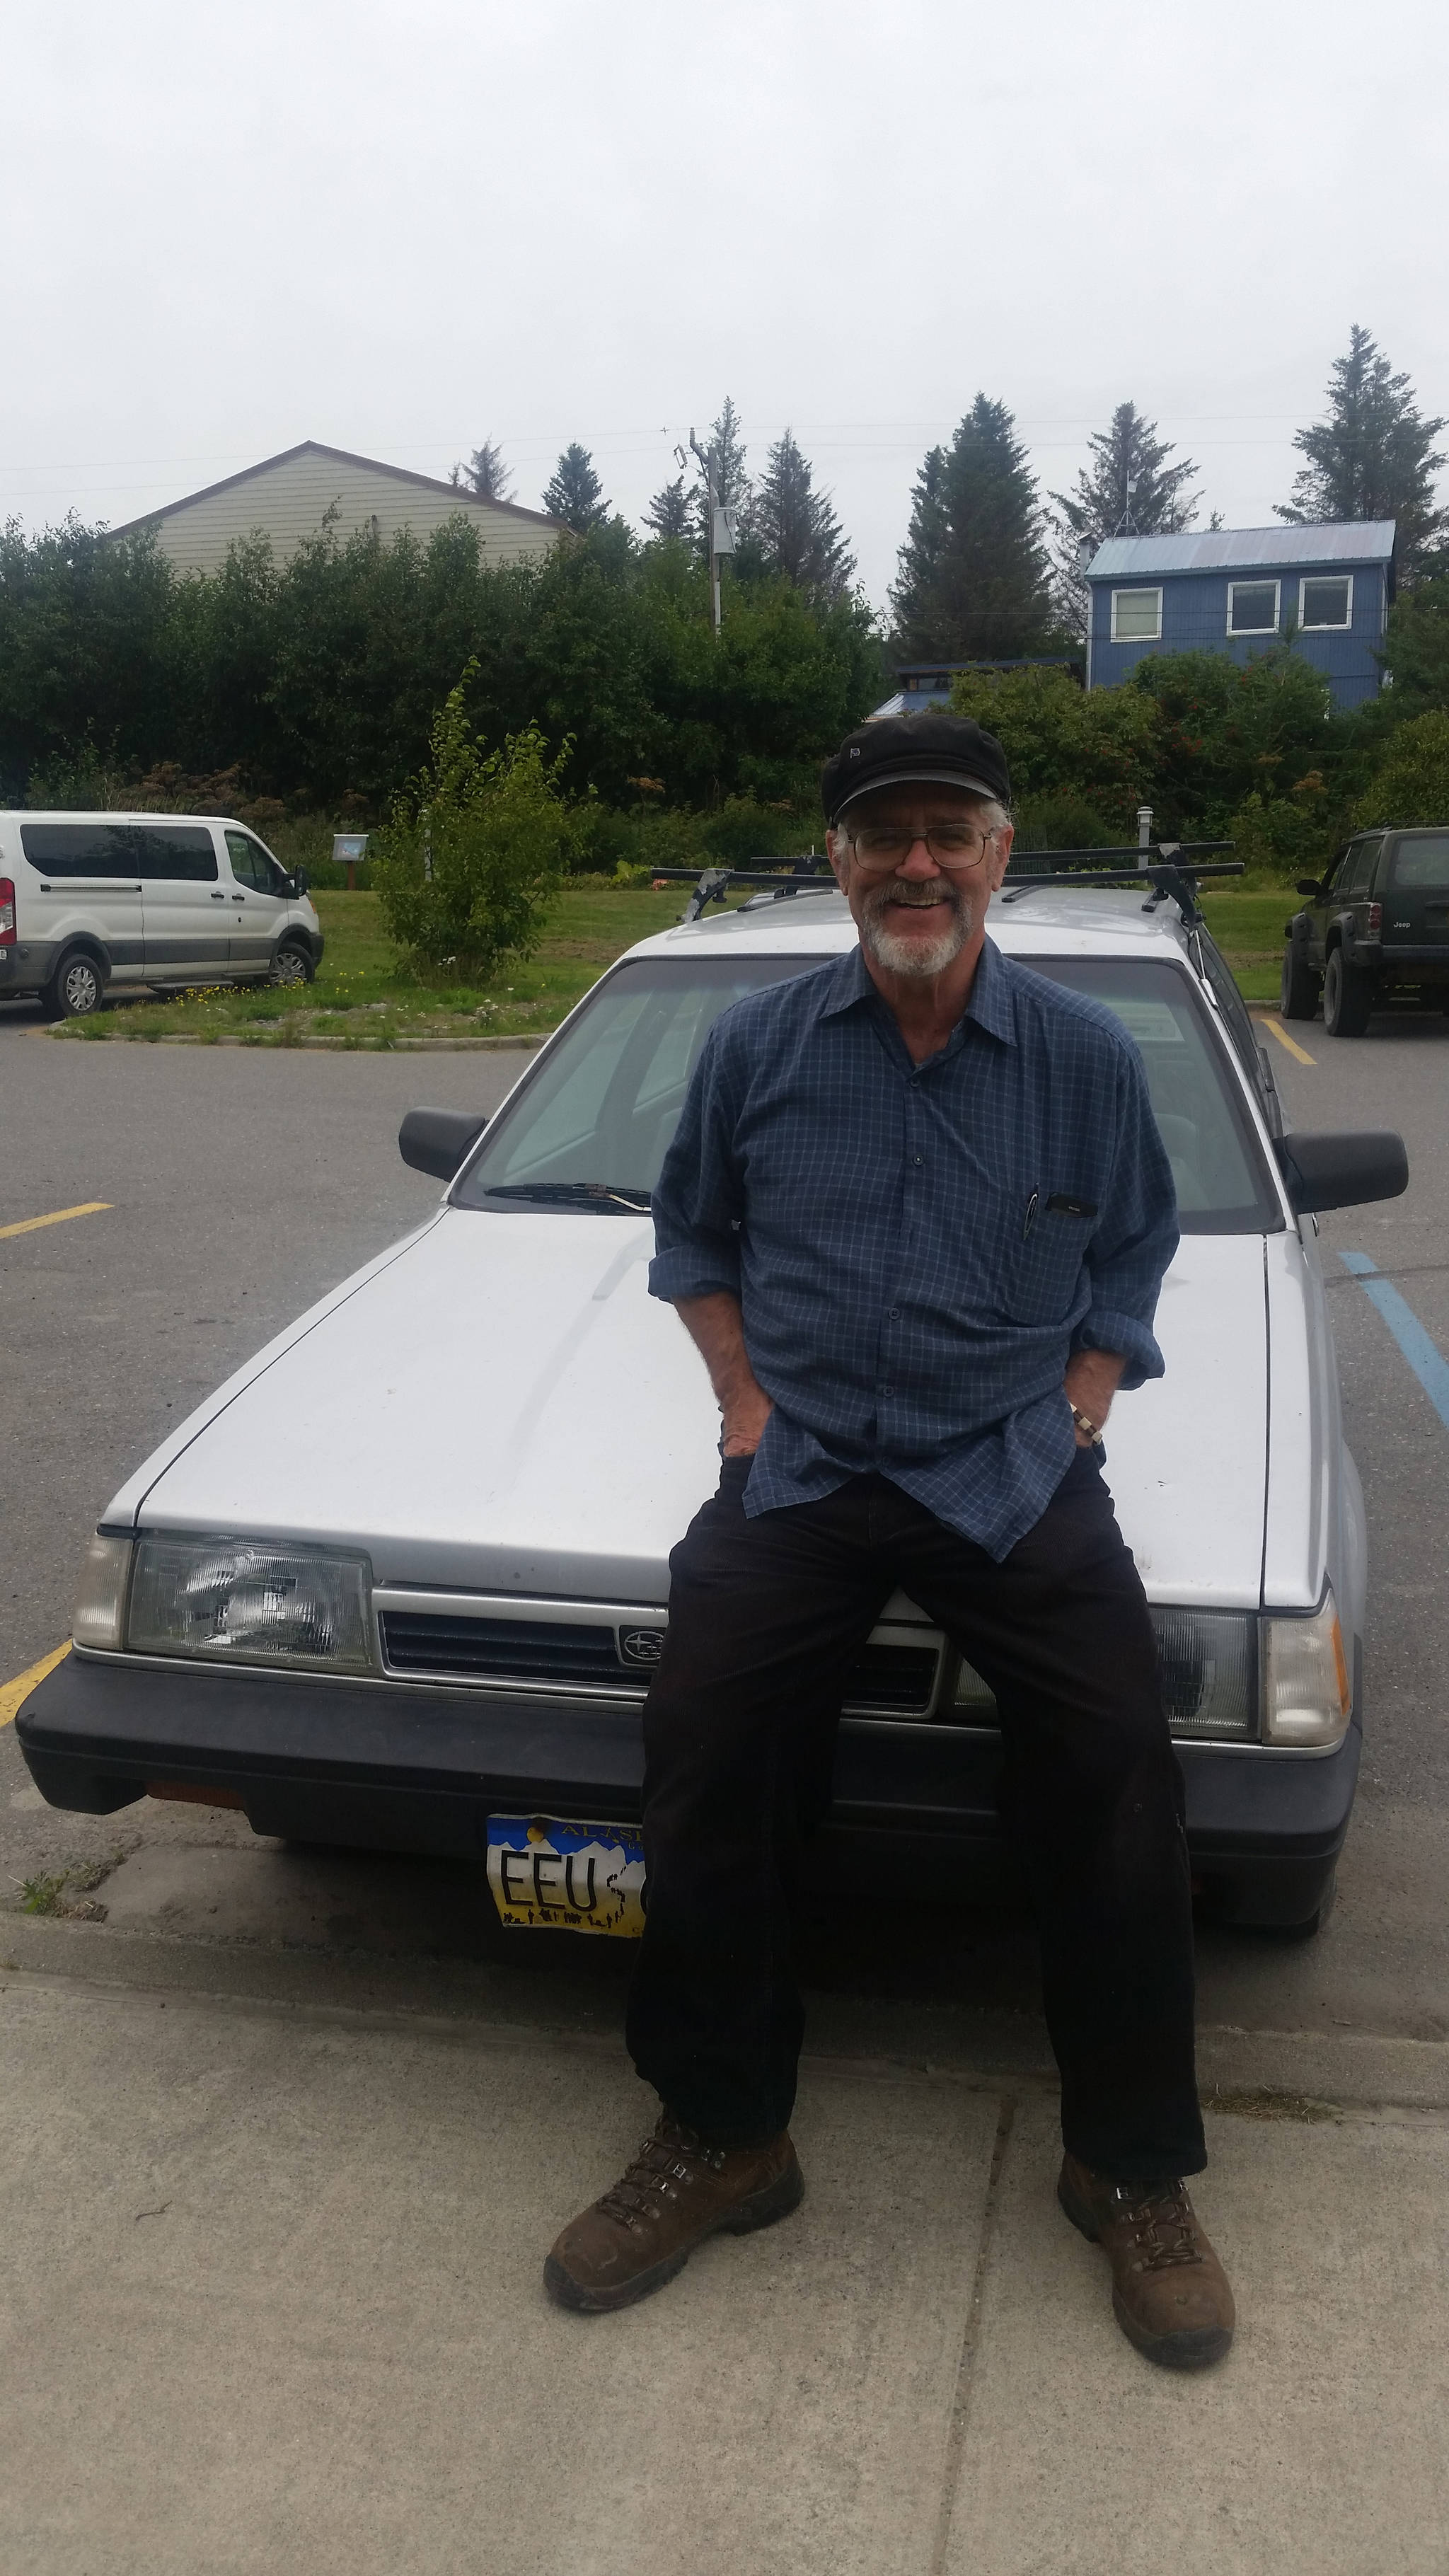 Bumppo Bremicker leans on his 1992 Subaru Loyale on Aug. 10, 2018 in the Homer Public Library parking lot in Homer, Alaska. (Photo by Mira Klein)